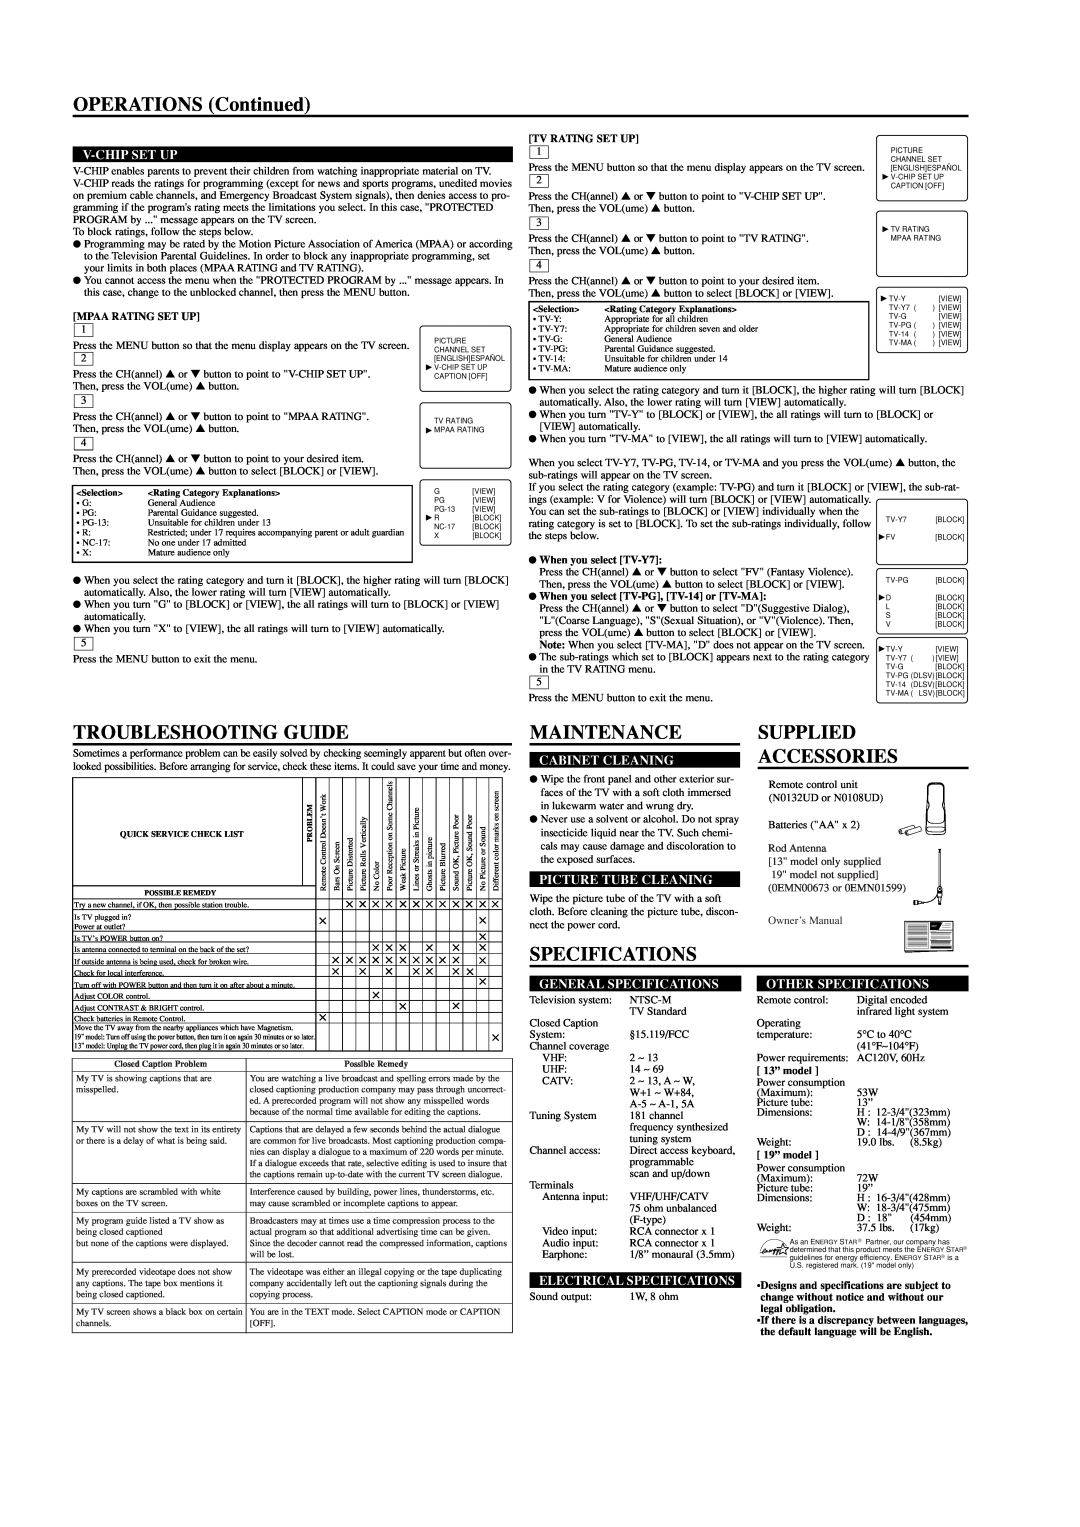 Sylvania 6413TD, 6419TD OPERATIONS Continued, Troubleshooting Guide, Maintenance, Specifications, Supplied Accessories 